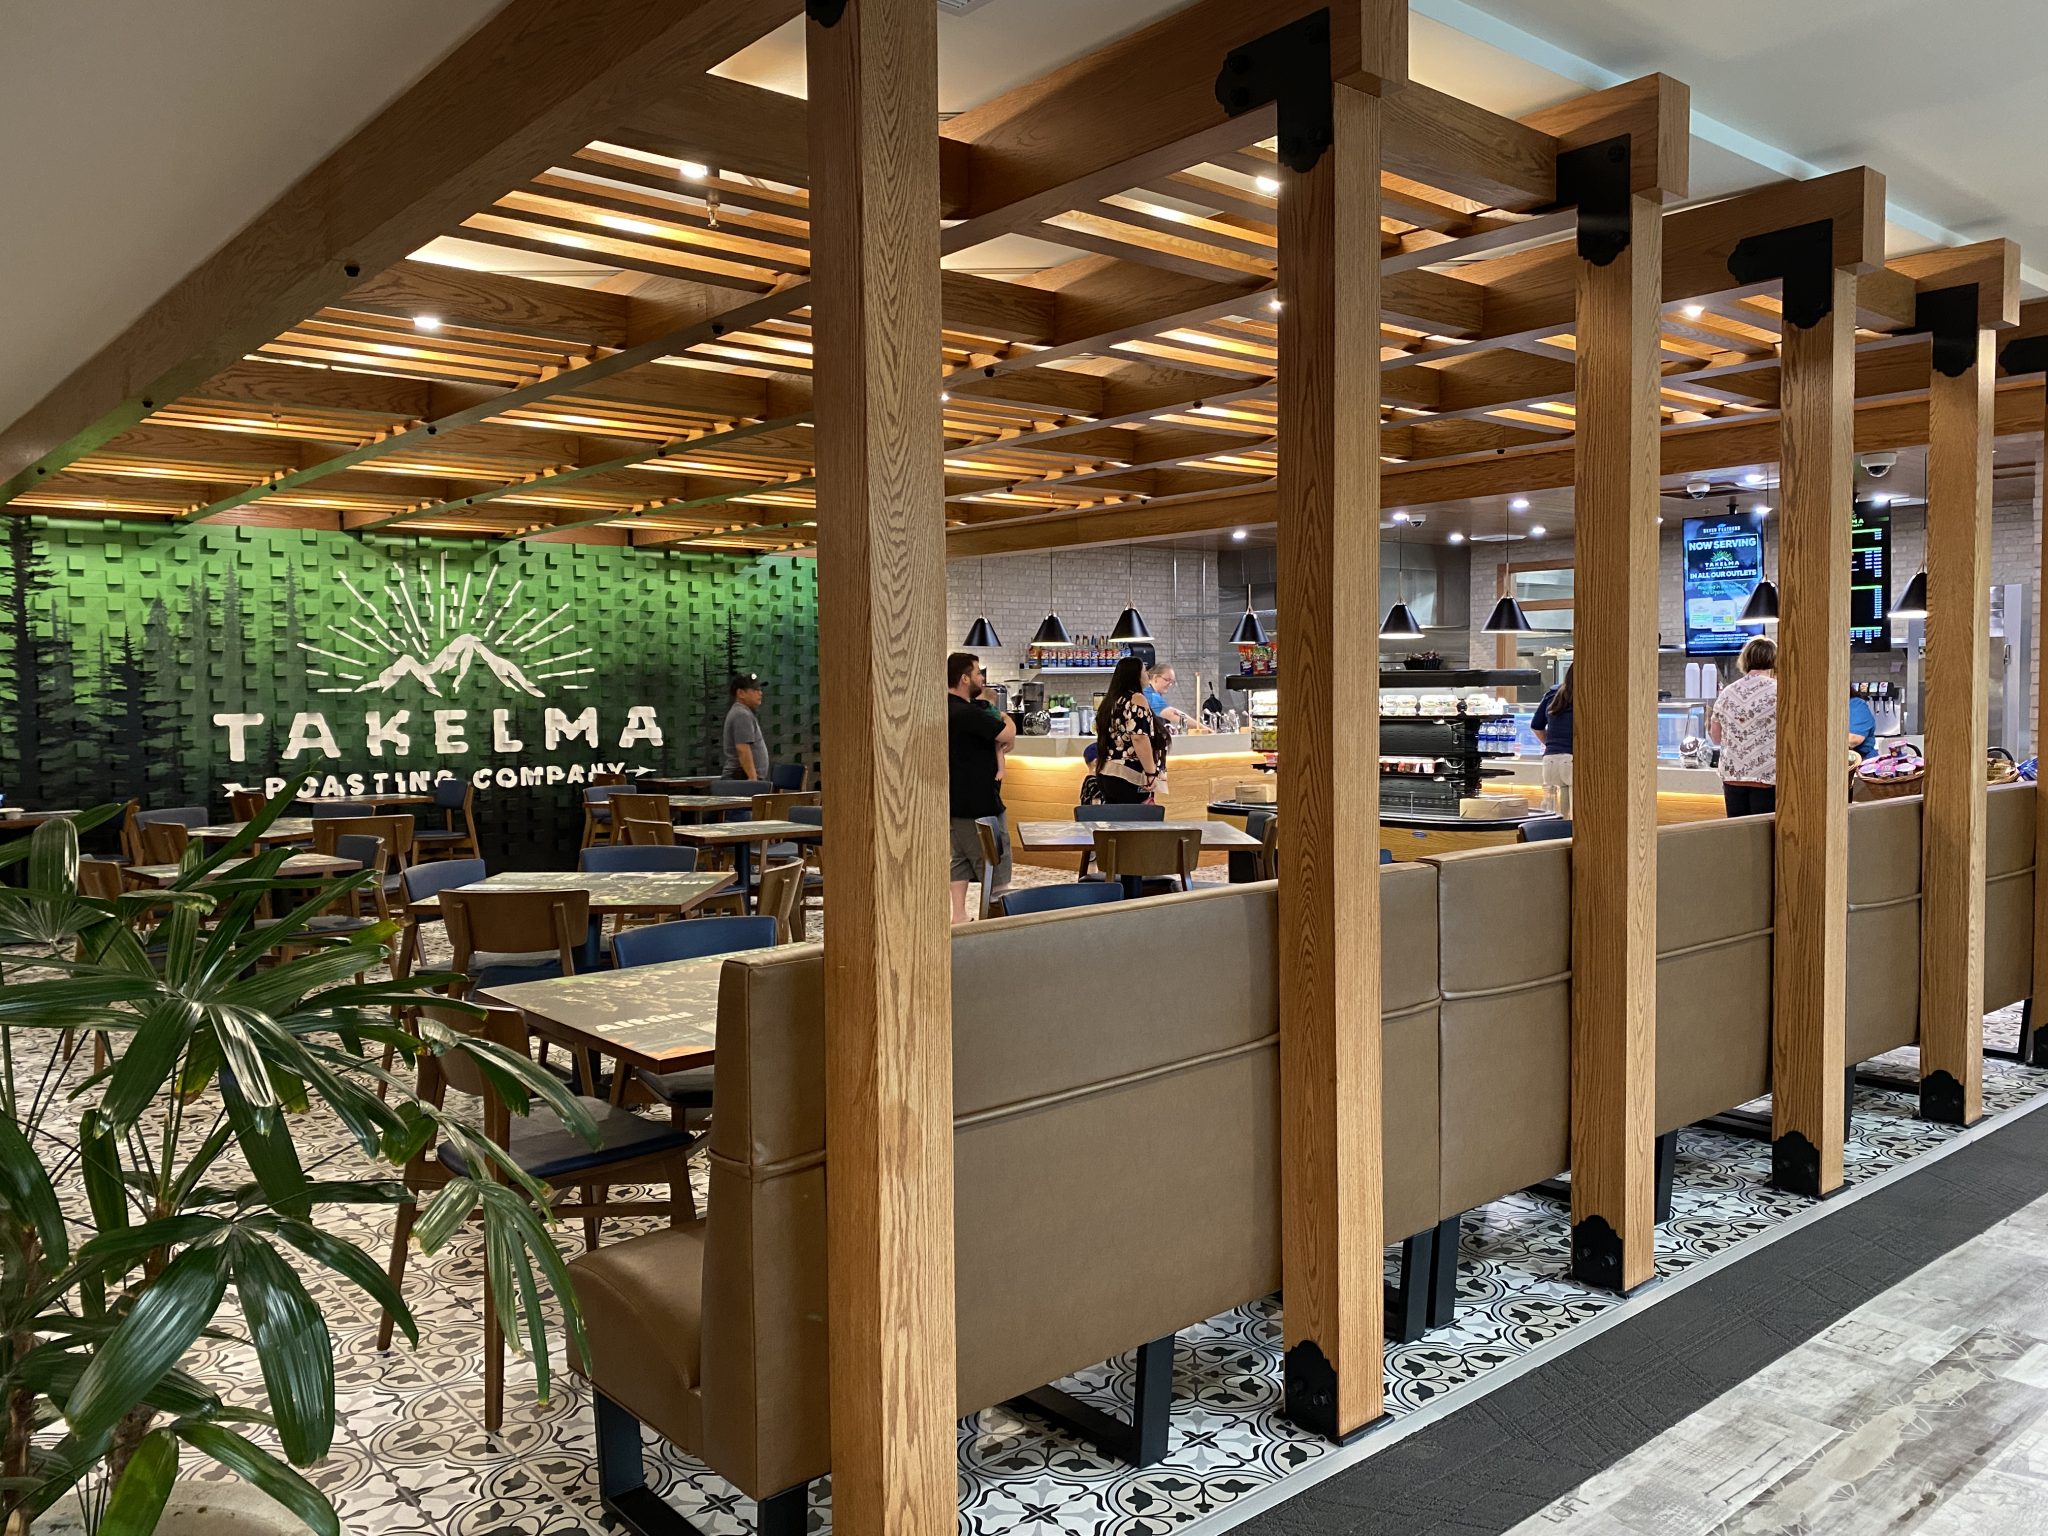 Takelma Roasting Company Inside Seven Feathers Casino Resort Serves Fresh Baked Pastries and Delicious Coffee